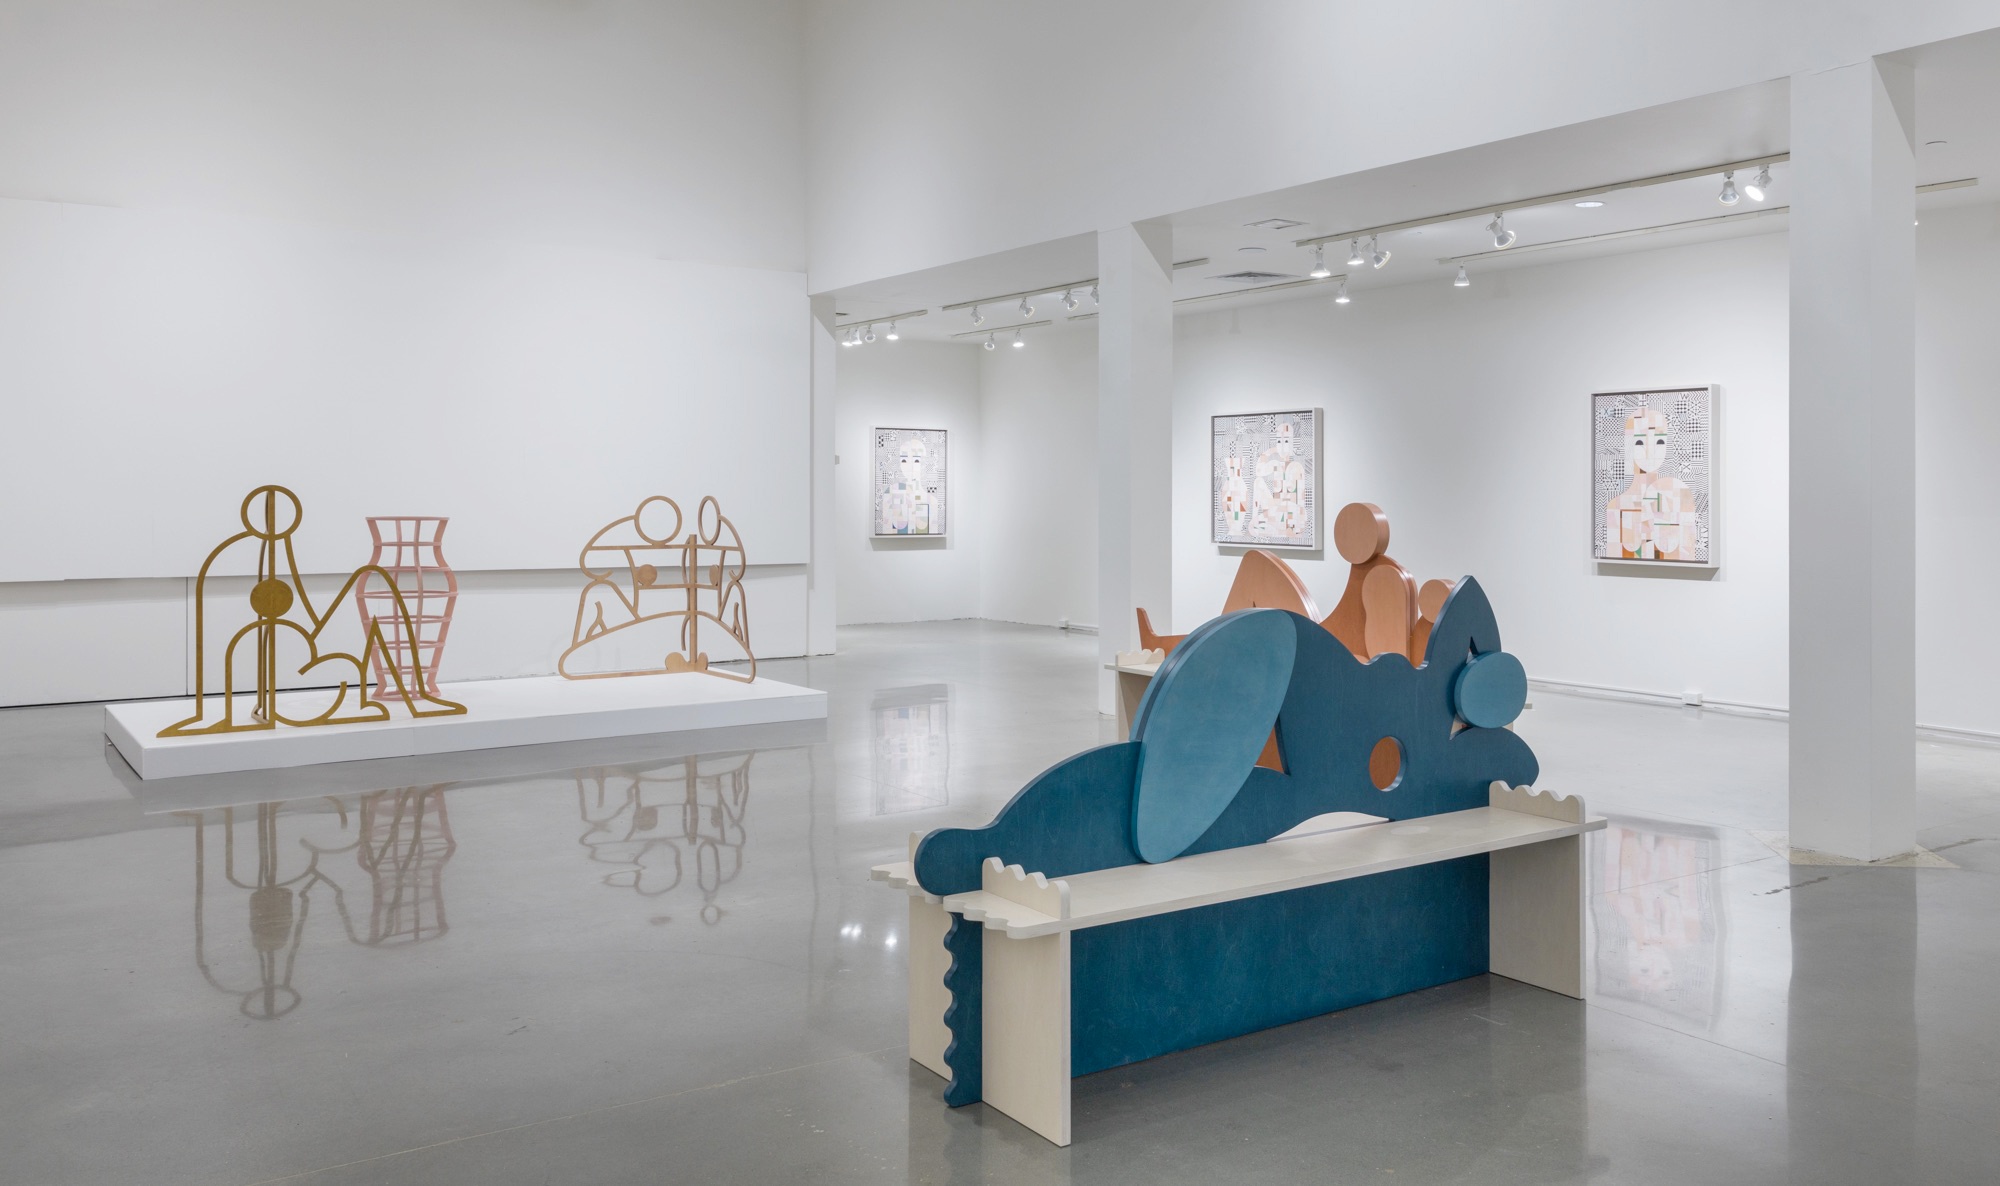 Multiple abstract figures arranged in various poses staged throughout a white room. Three abstract paintings of figures line the back, right wall of the gallery.